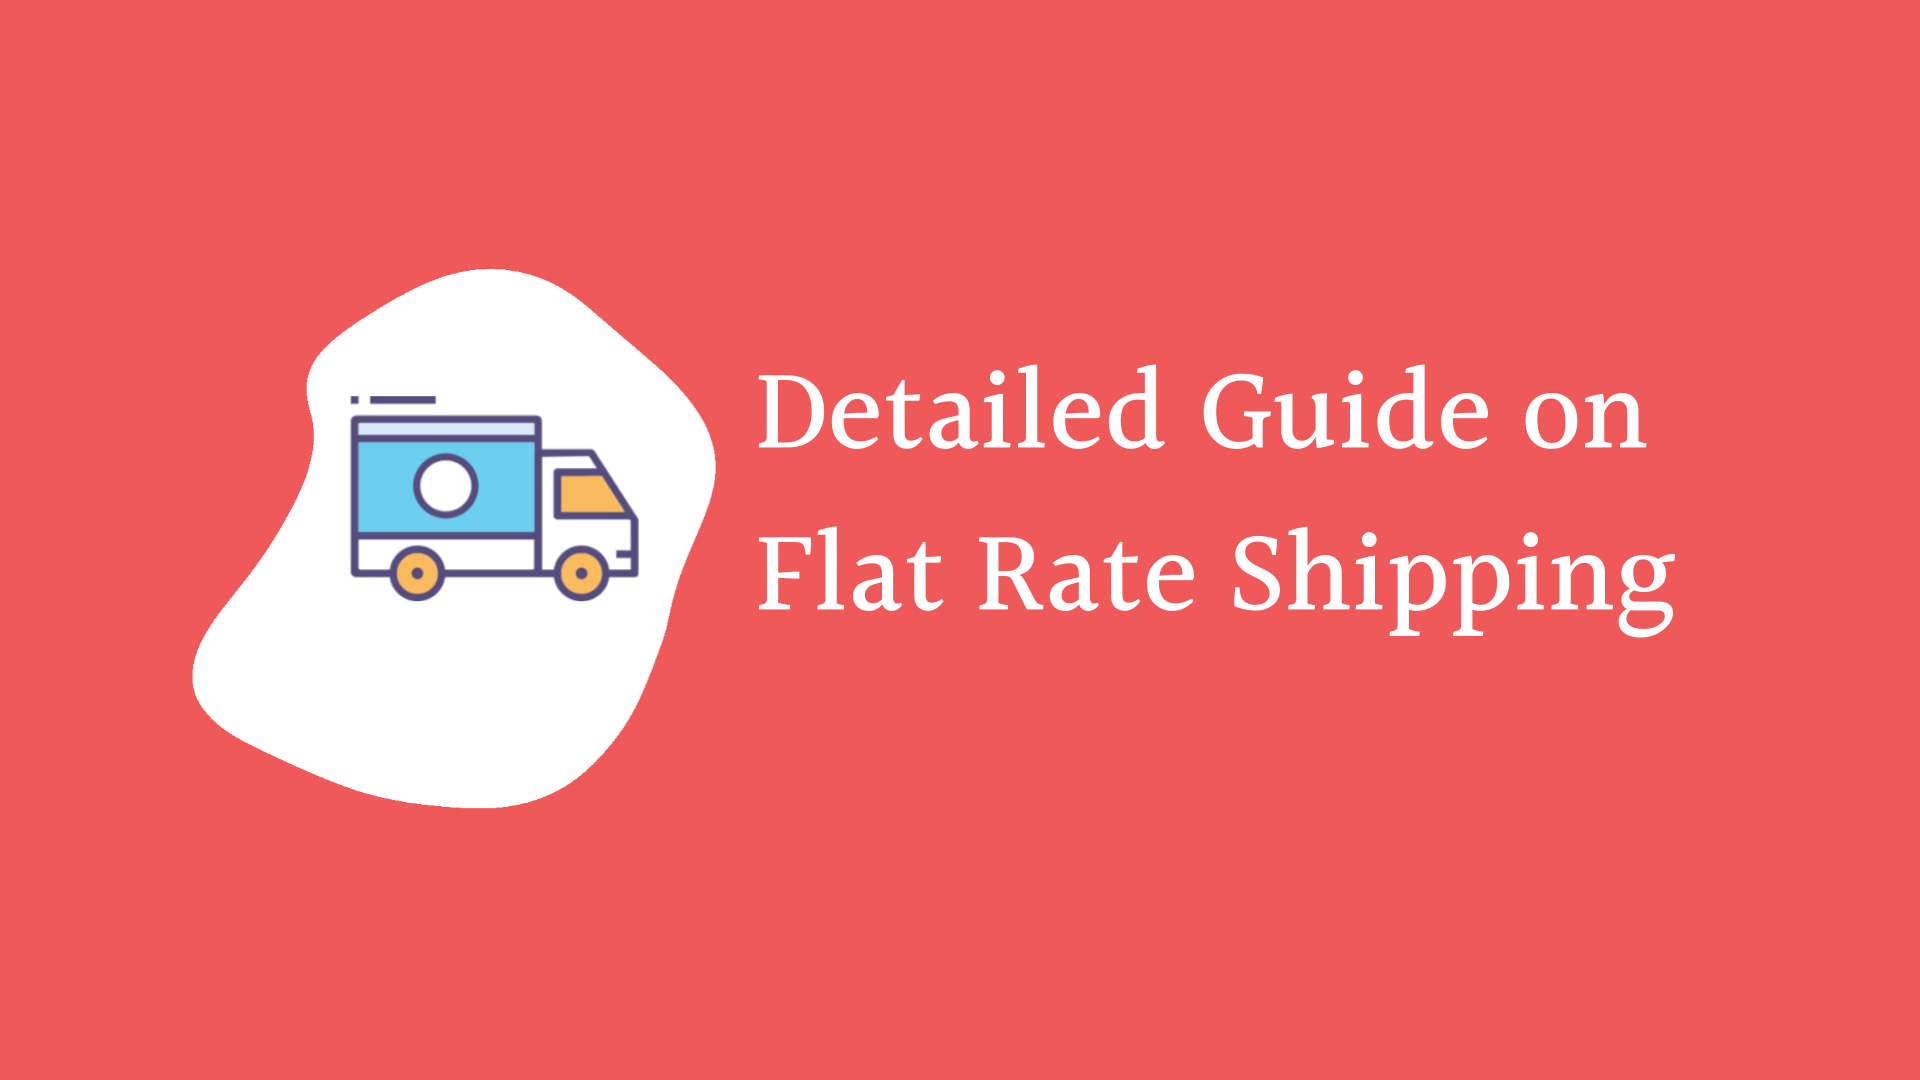 A Detailed Guide on Flat Rate Shipping - The DotStore